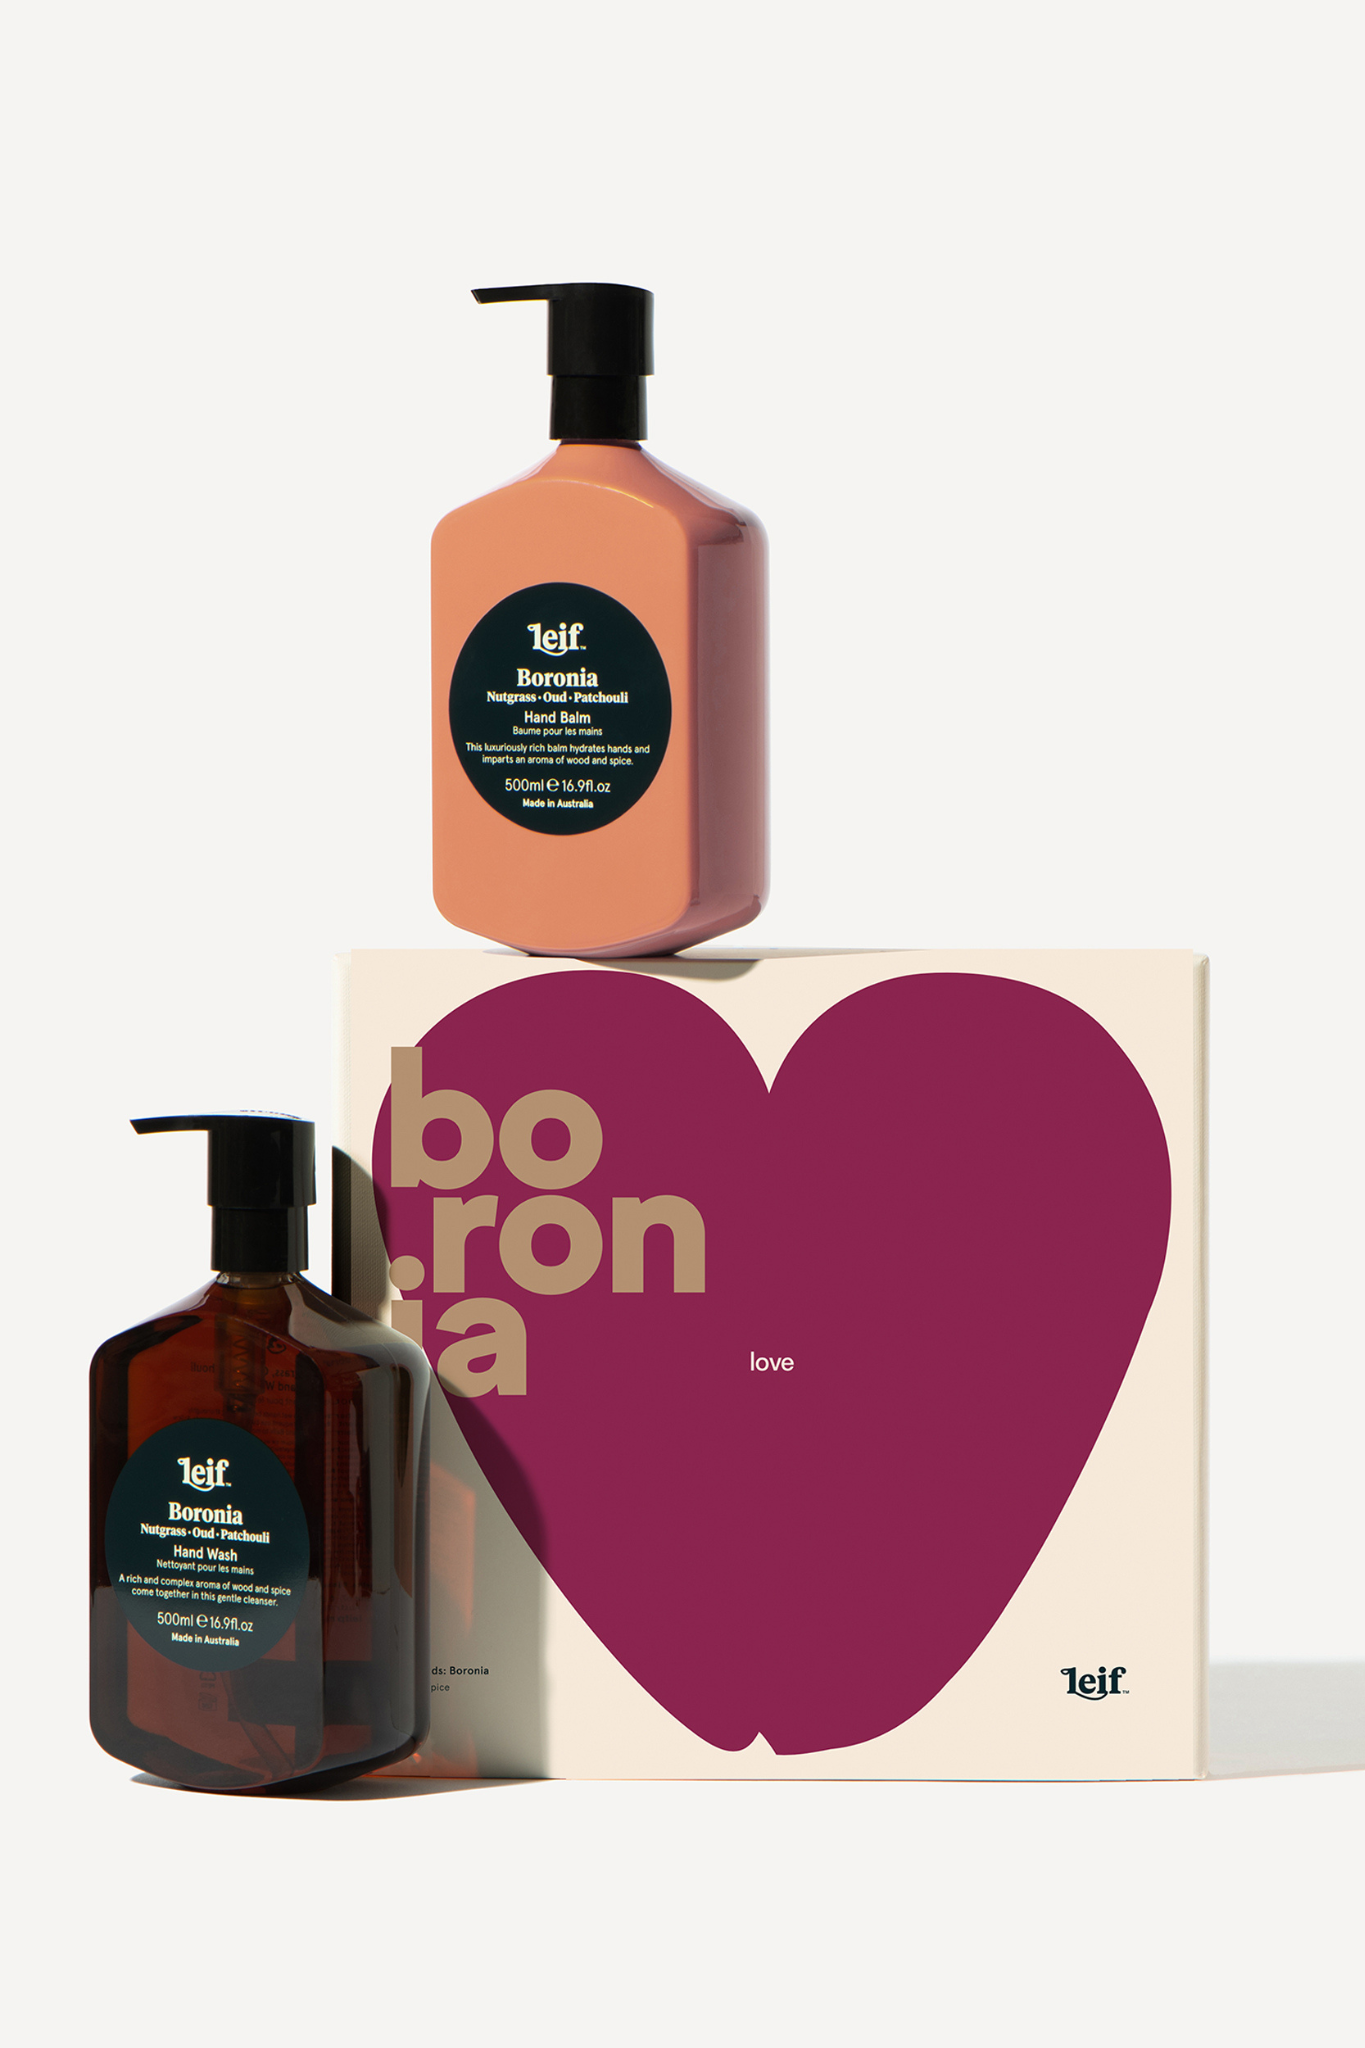 Limited Edition 'LOVE' Two Hands: Boronia